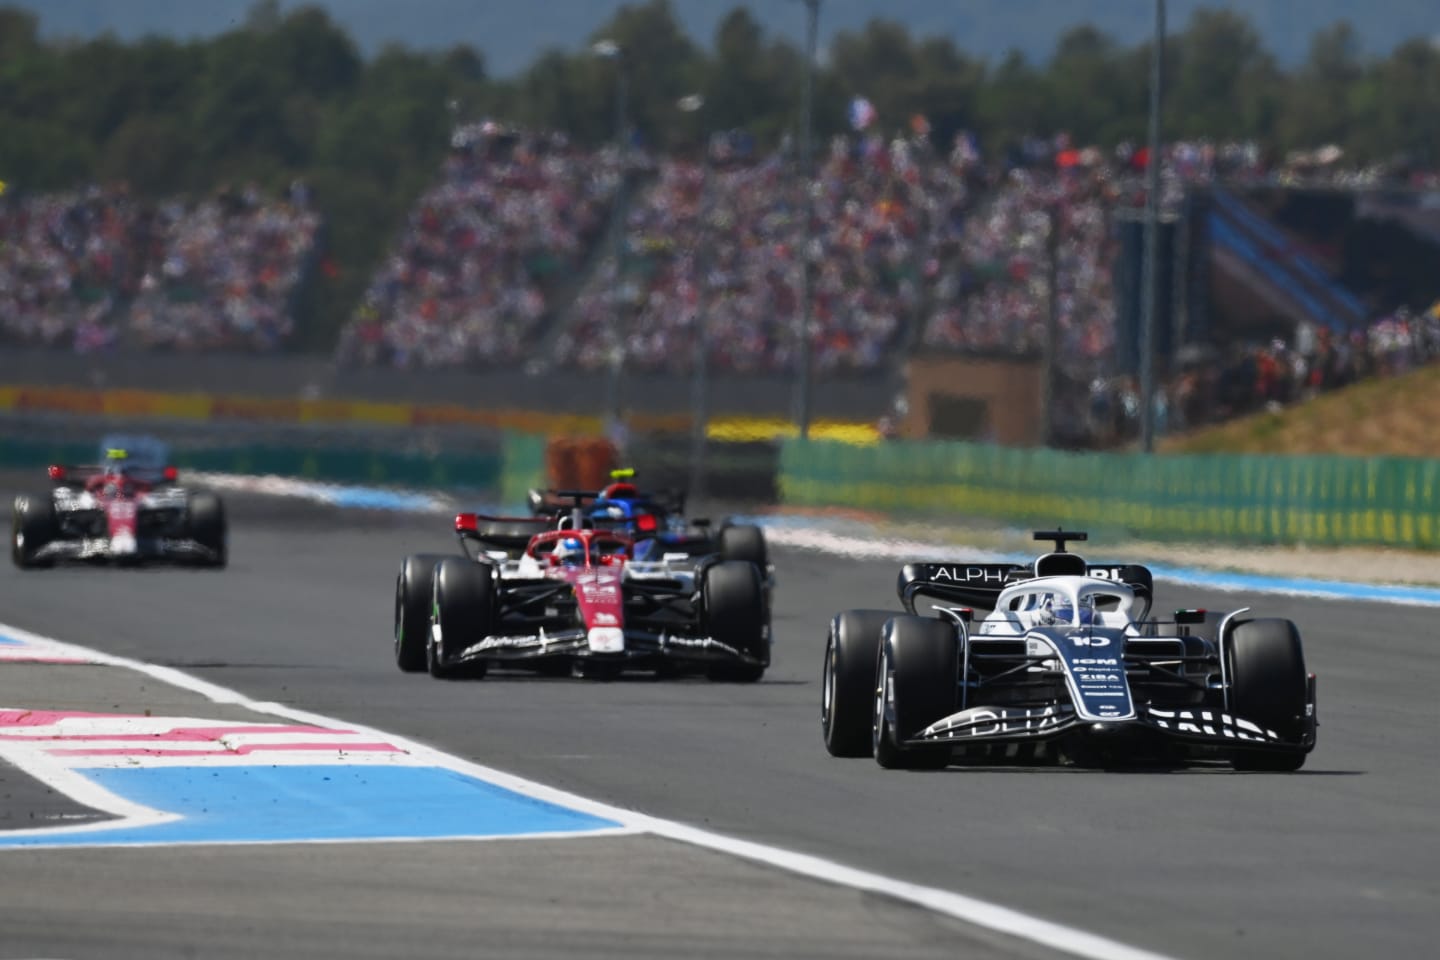 LE CASTELLET, FRANCE - JULY 24: Pierre Gasly of France driving the (10) Scuderia AlphaTauri AT03 leads Valtteri Bottas of Finland driving the (77) Alfa Romeo F1 C42 Ferrari during the F1 Grand Prix of France at Circuit Paul Ricard on July 24, 2022 in Le Castellet, France. (Photo by Dan Mullan/Getty Images)